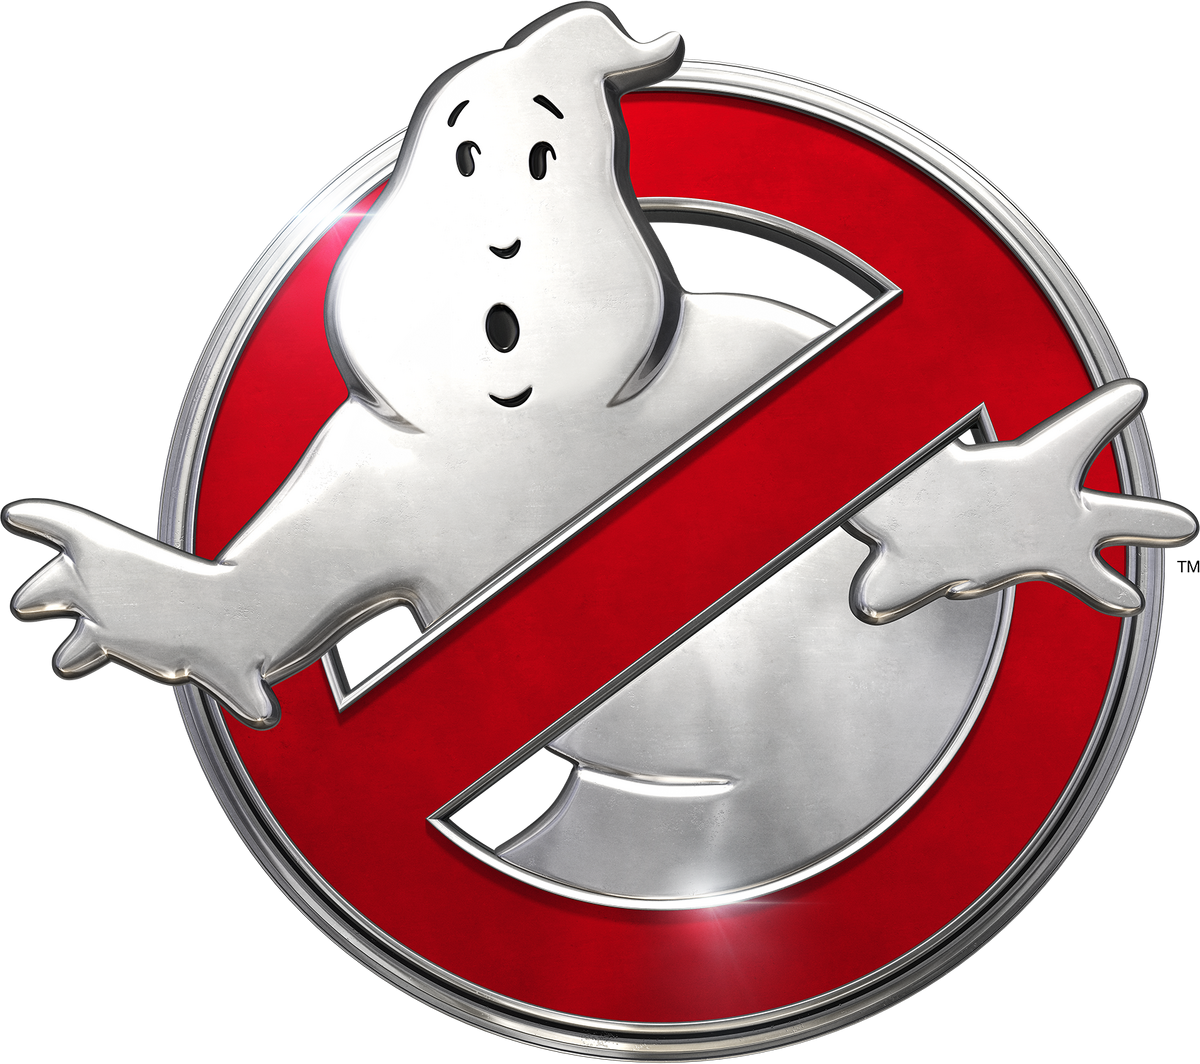 Ghostbusters: meet the man behind the logo